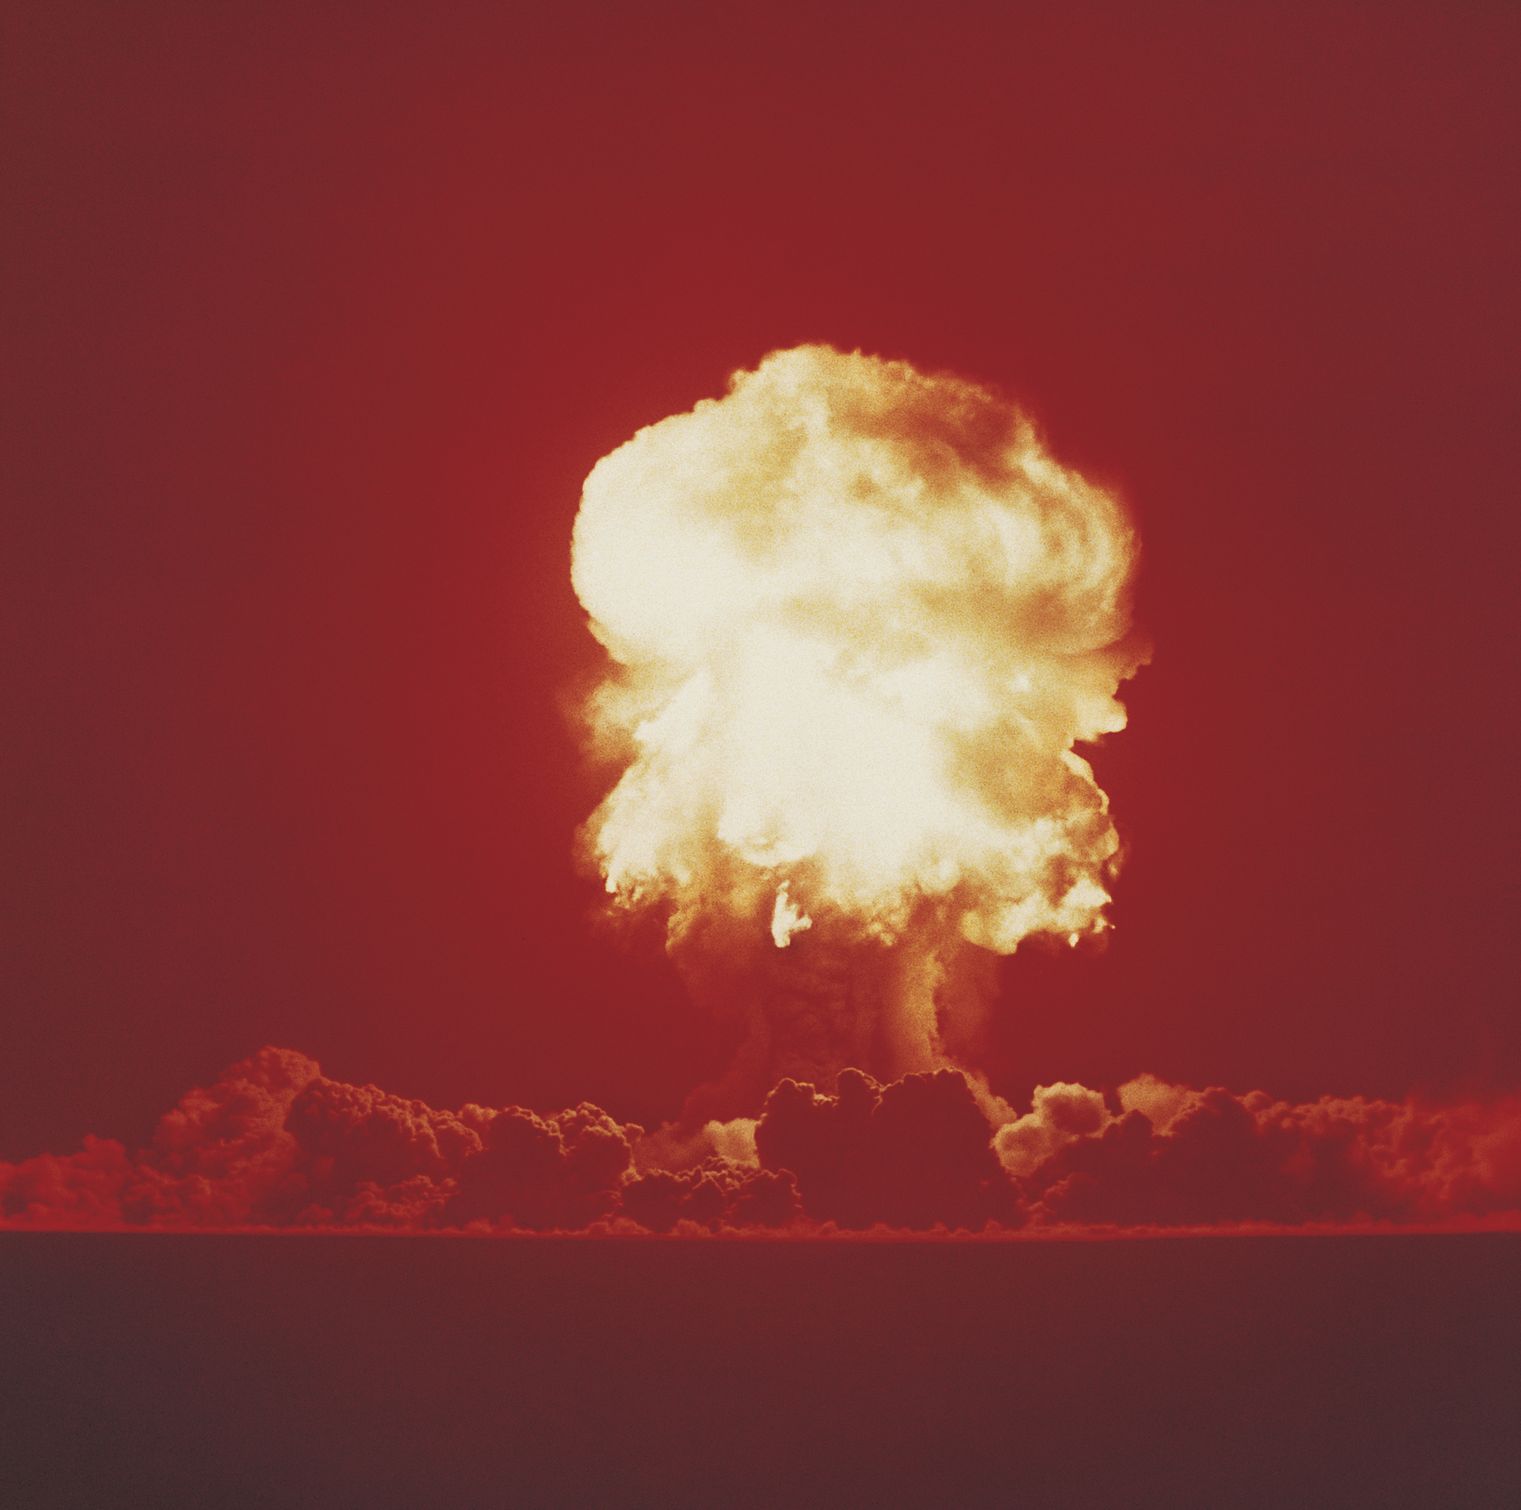 What If We Blew Up All the World's Nukes at Once?